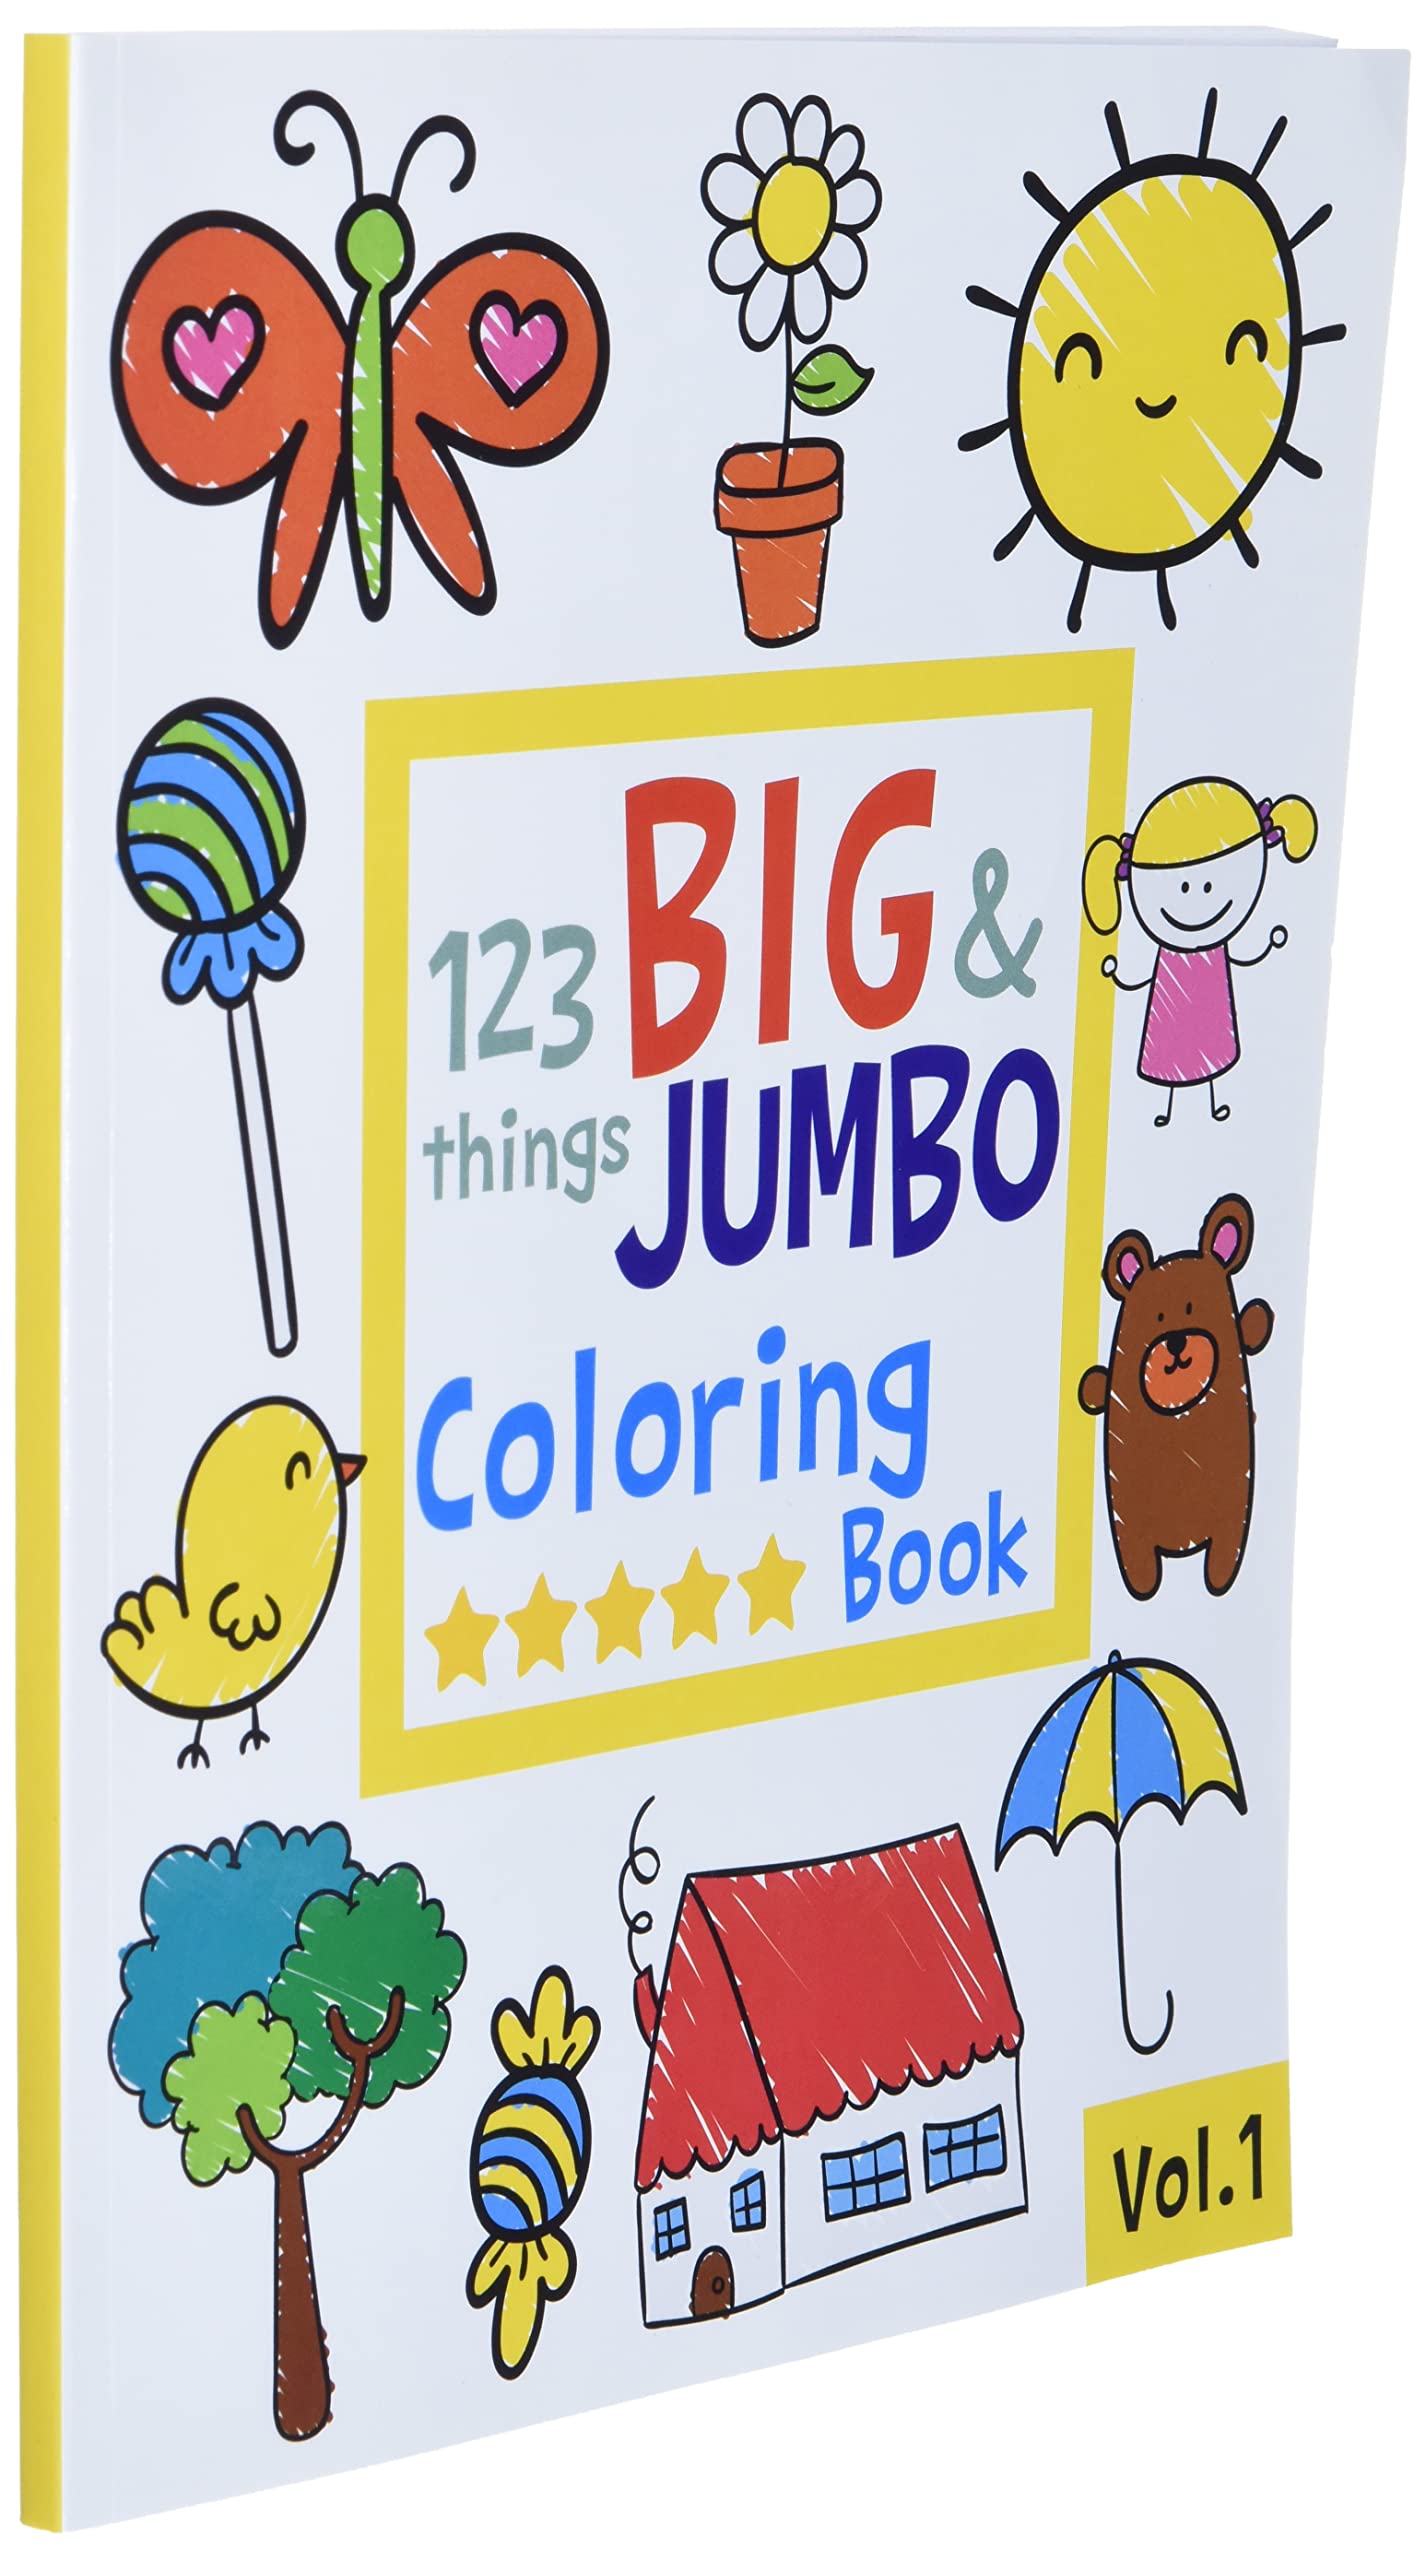 123 things BIG & JUMBO Coloring Book: 123 Coloring Pages!!, Easy, LARGE, GIANT Simple Picture Coloring Books for Toddlers, Kids Ages 2-4, Early Learning, Preschool and Kindergarten